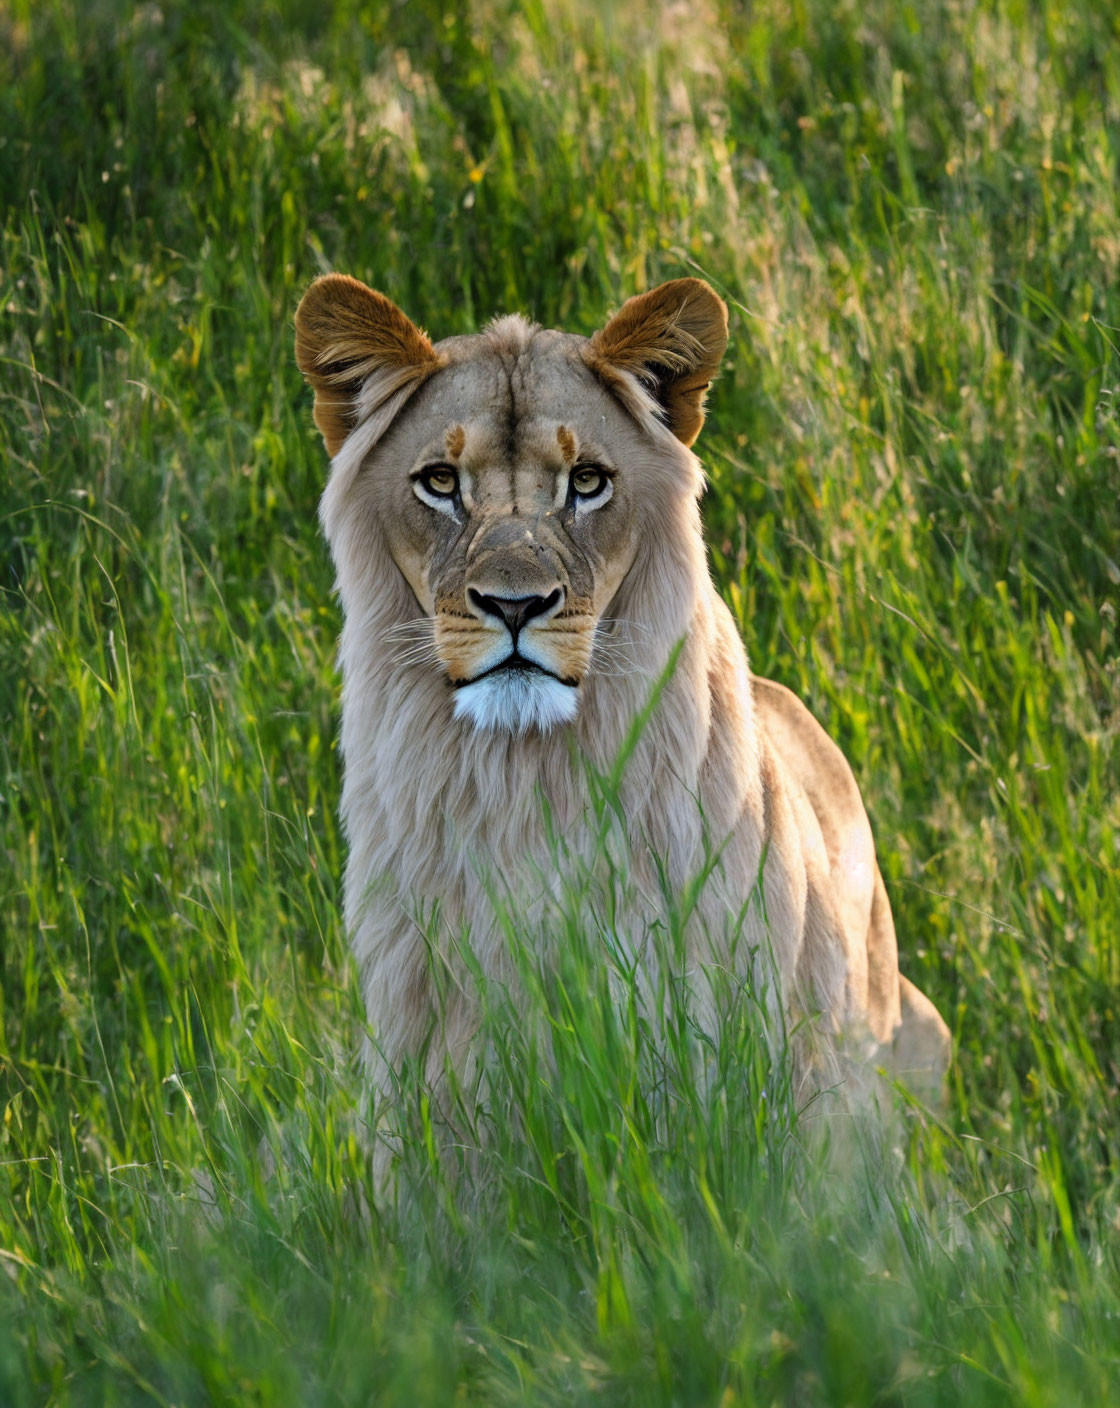 Majestic lion in tall grass gazes calmly at the camera